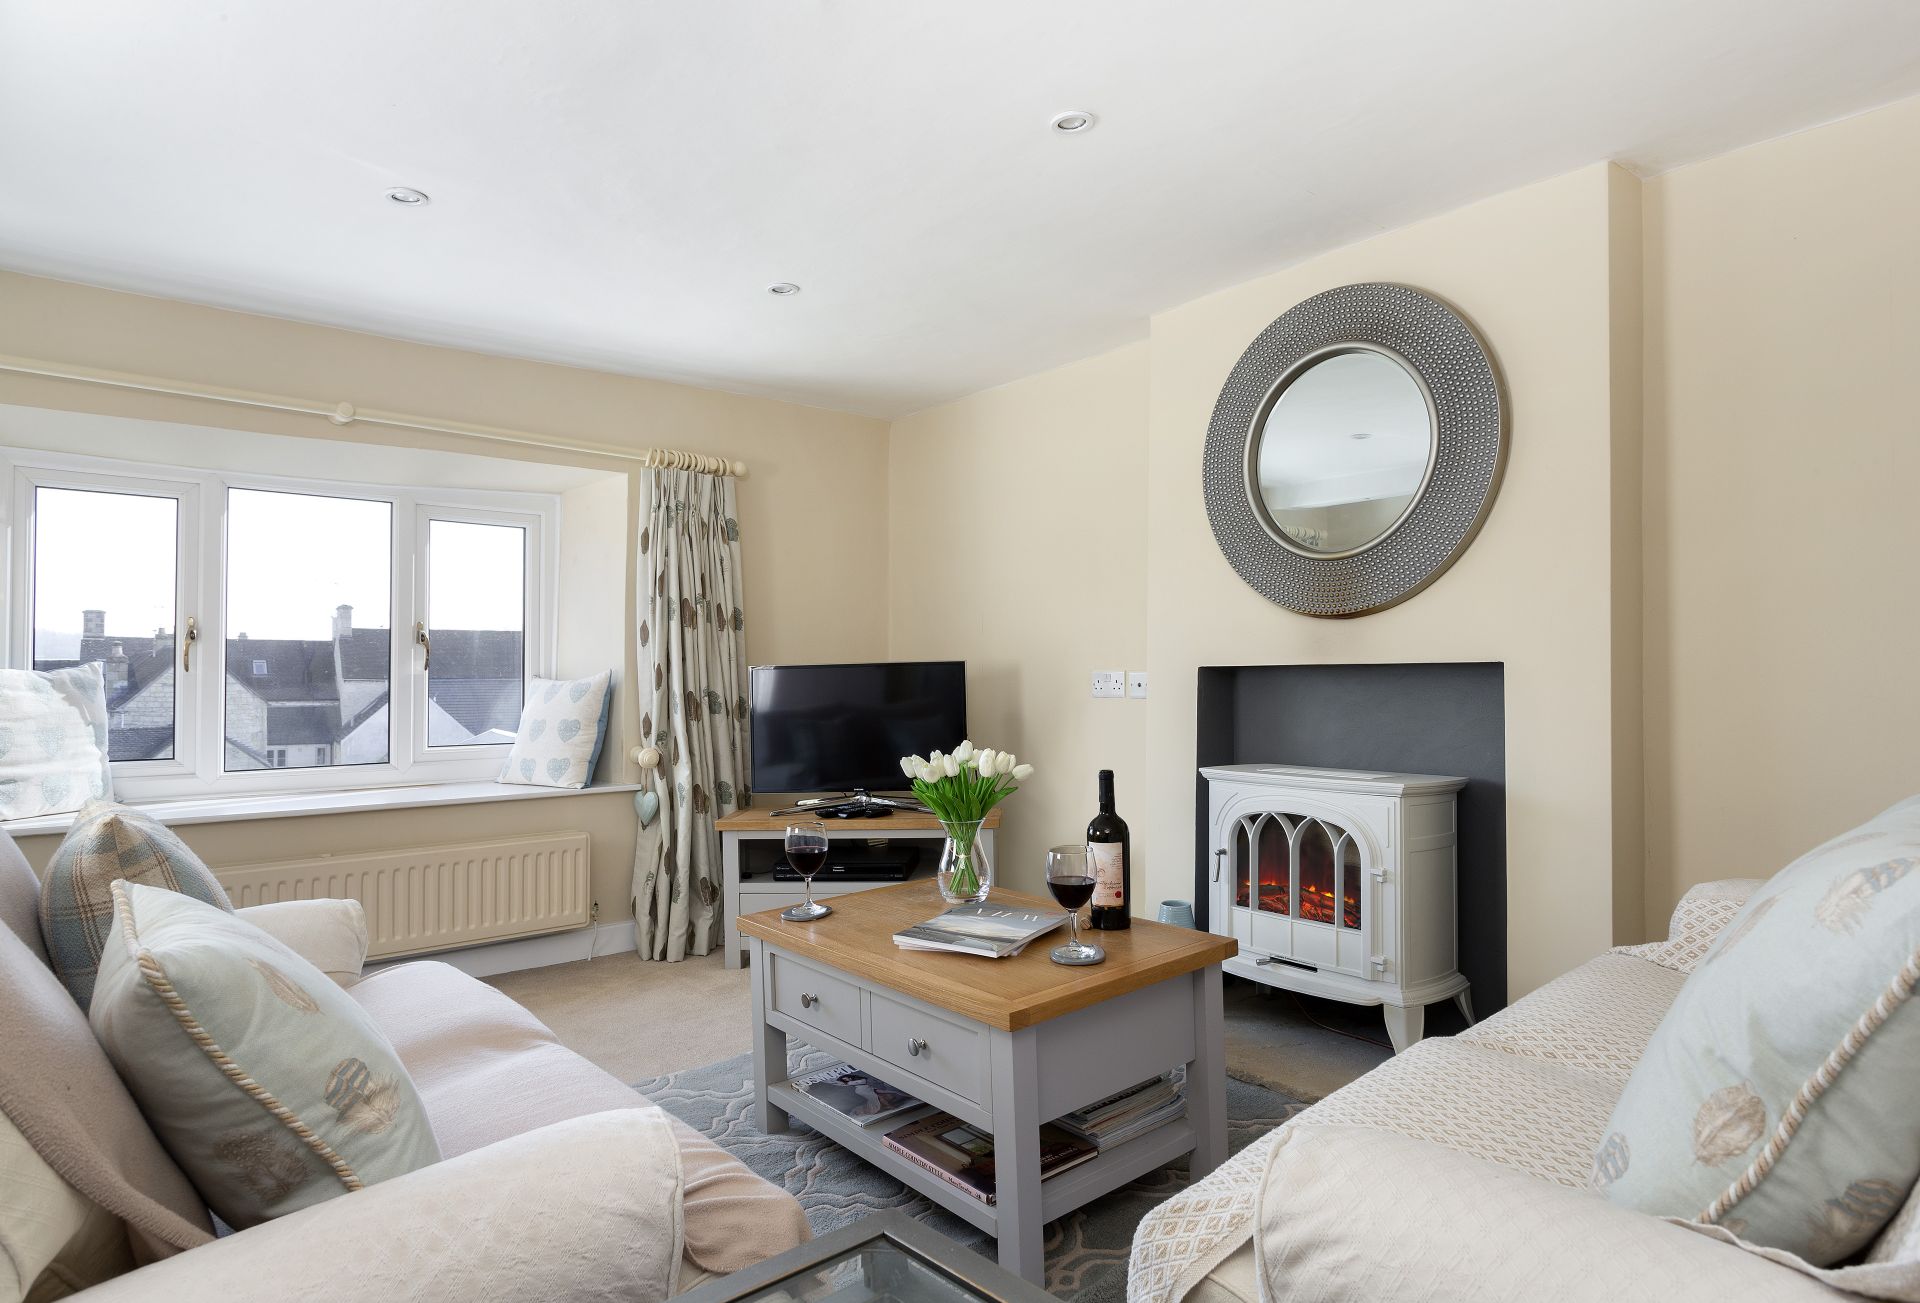 Spring Cottage is located in Painswick